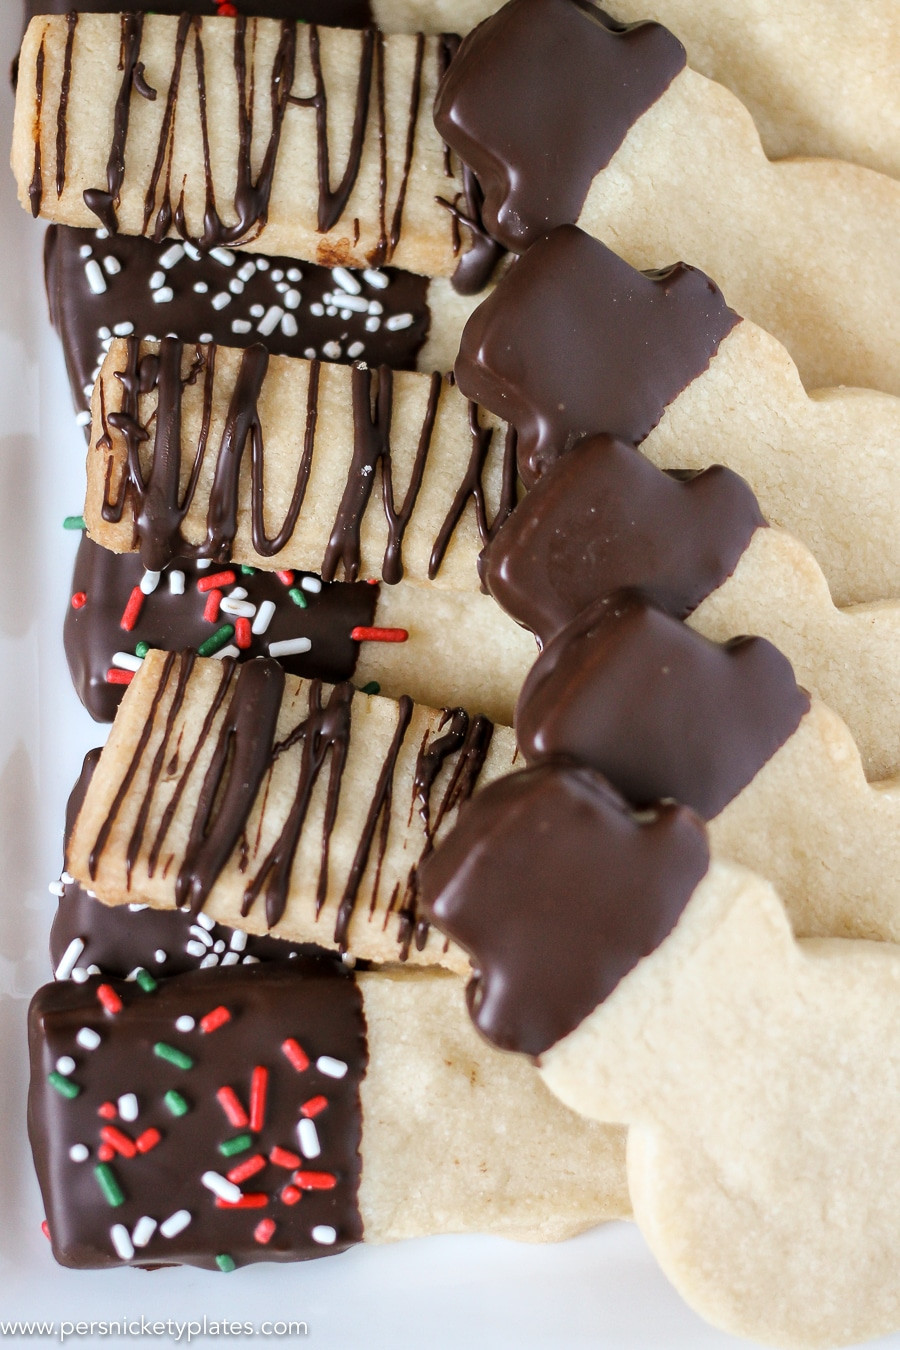 Shortbread Cookies Dipped In Chocolate
 Chocolate Dipped Shortbread Cookies Persnickety Plates